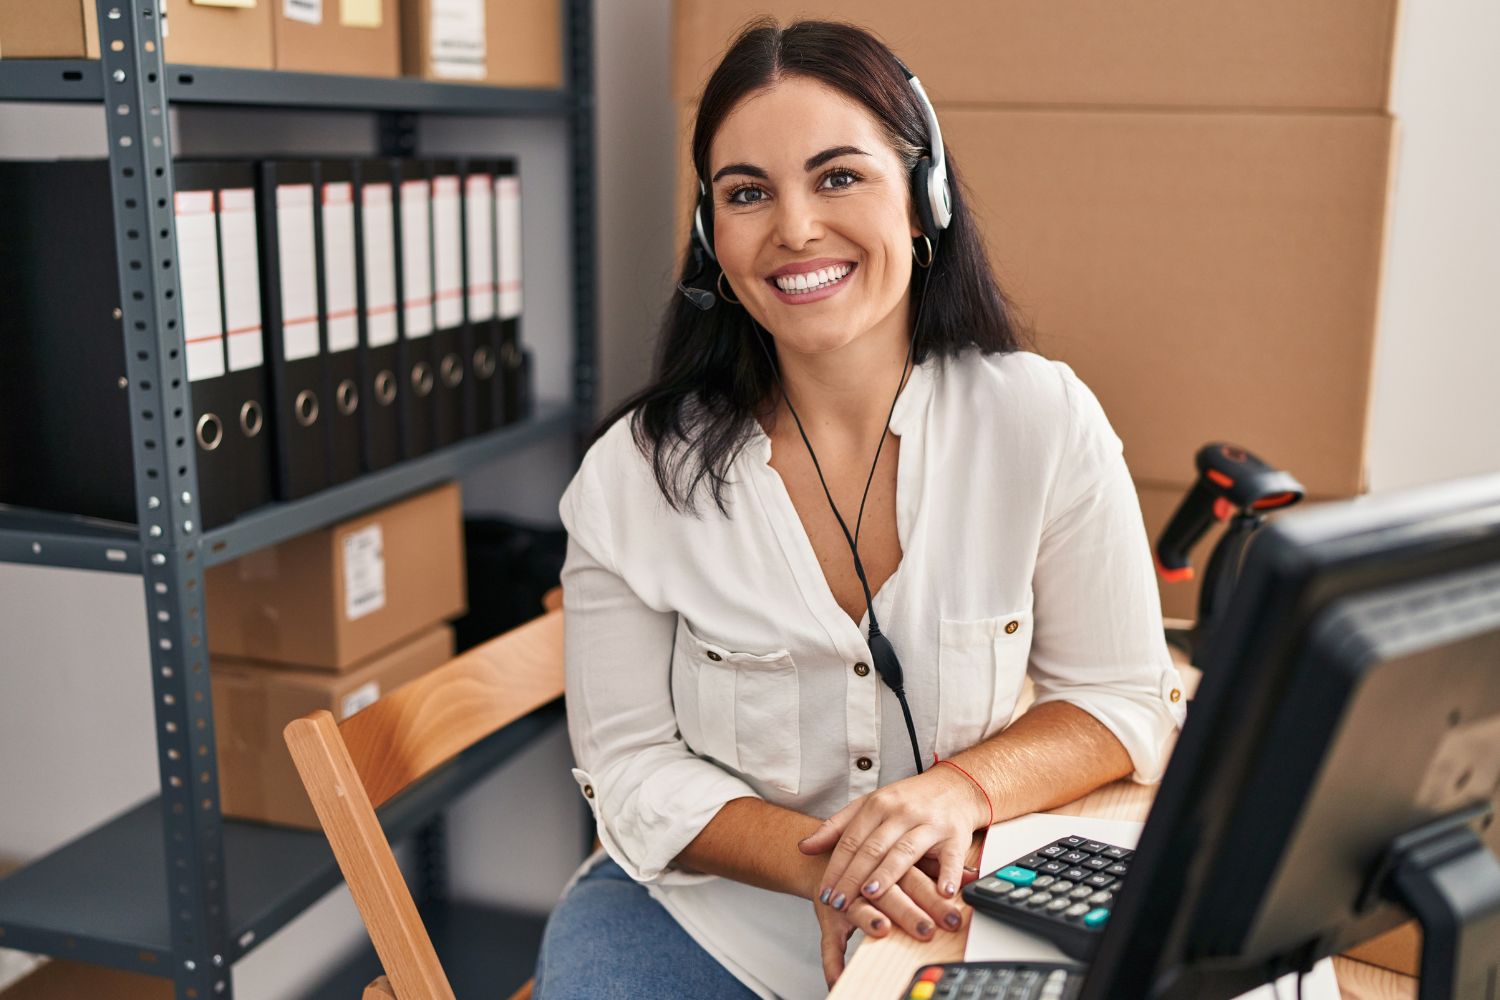  Image of an account representative smiling at the camera at her desk